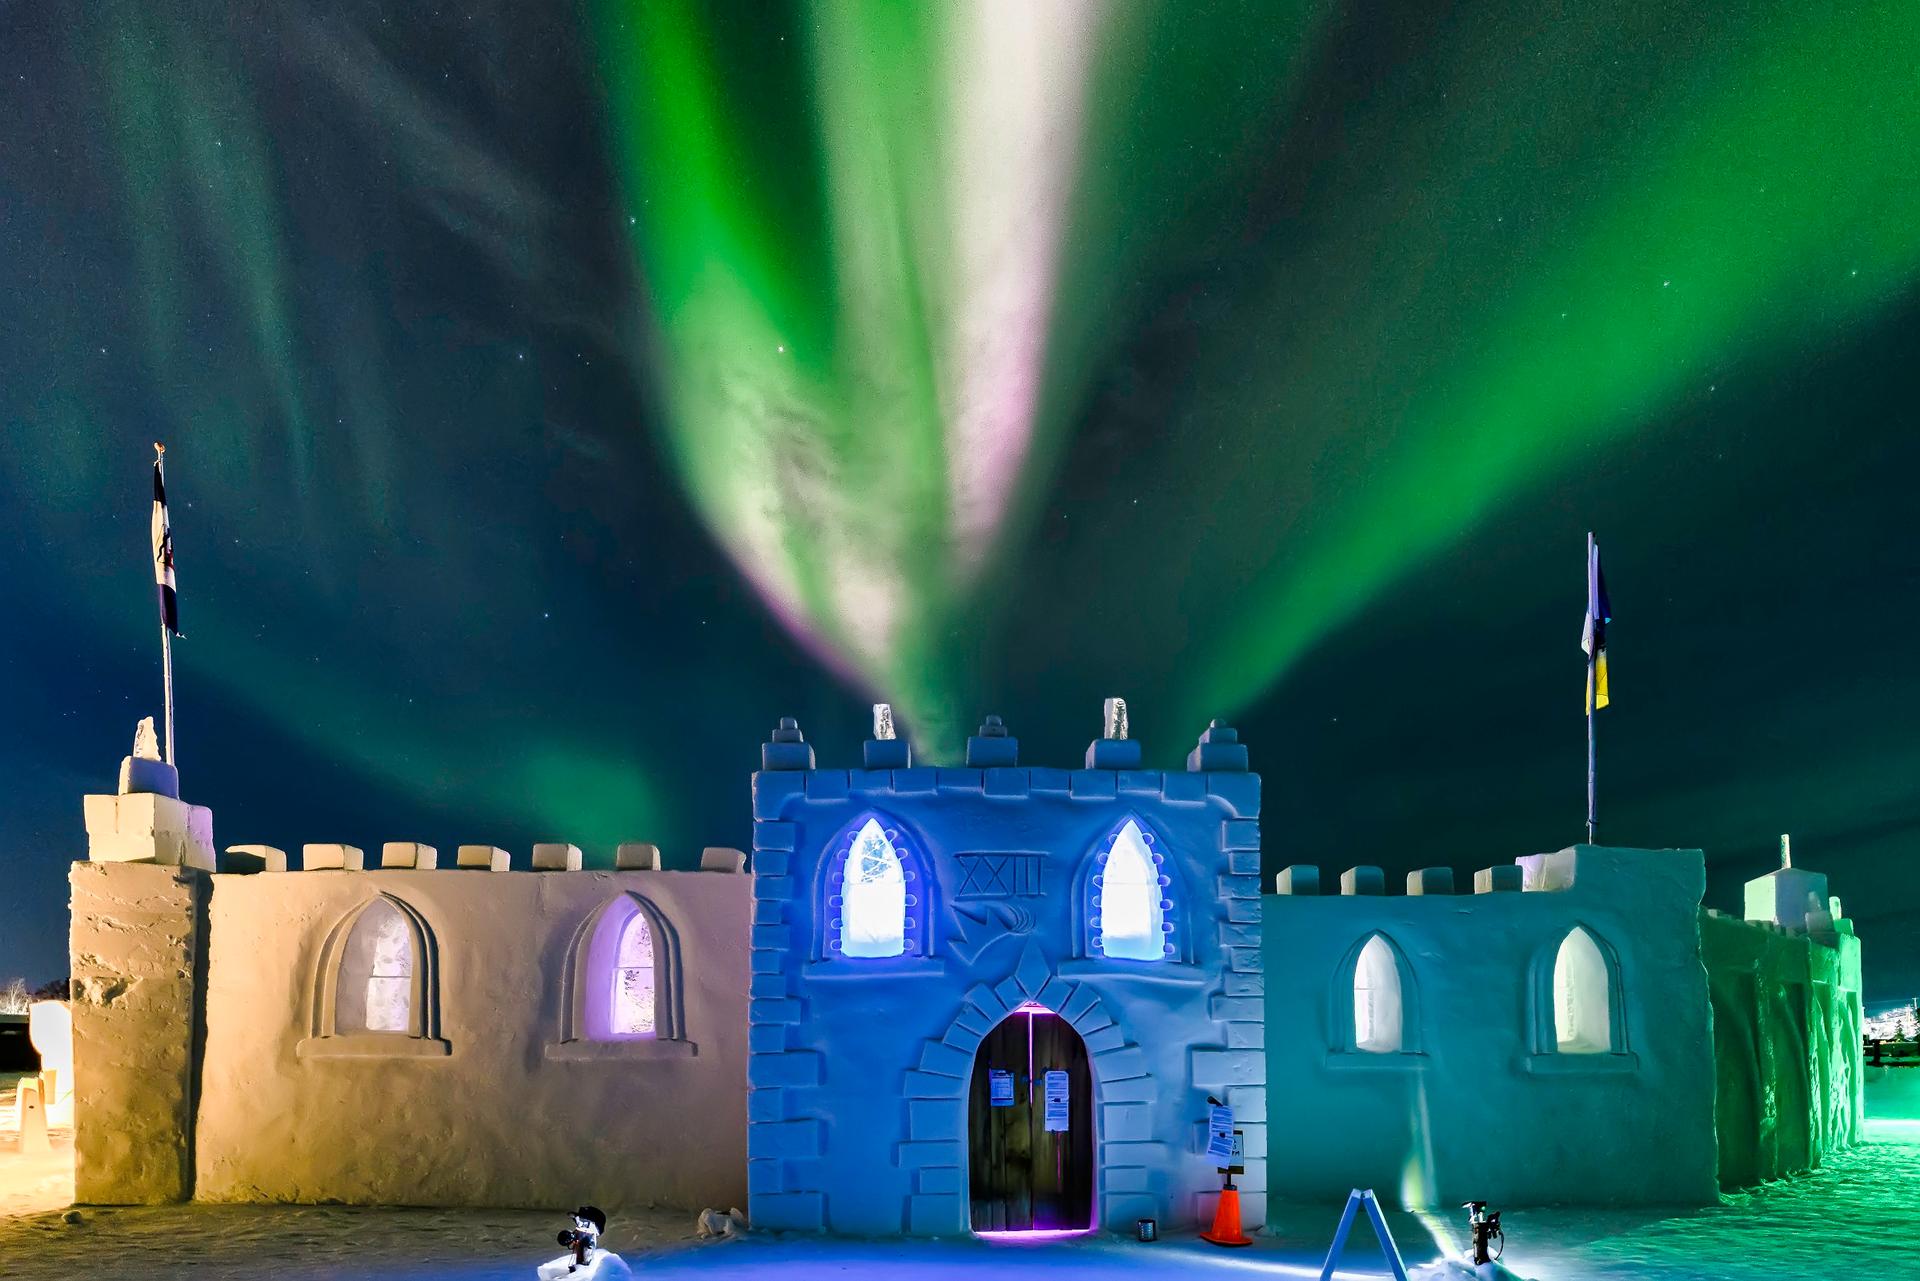 The northern lights seen during Yellowknife's legendary Snowking's Winter Festival.